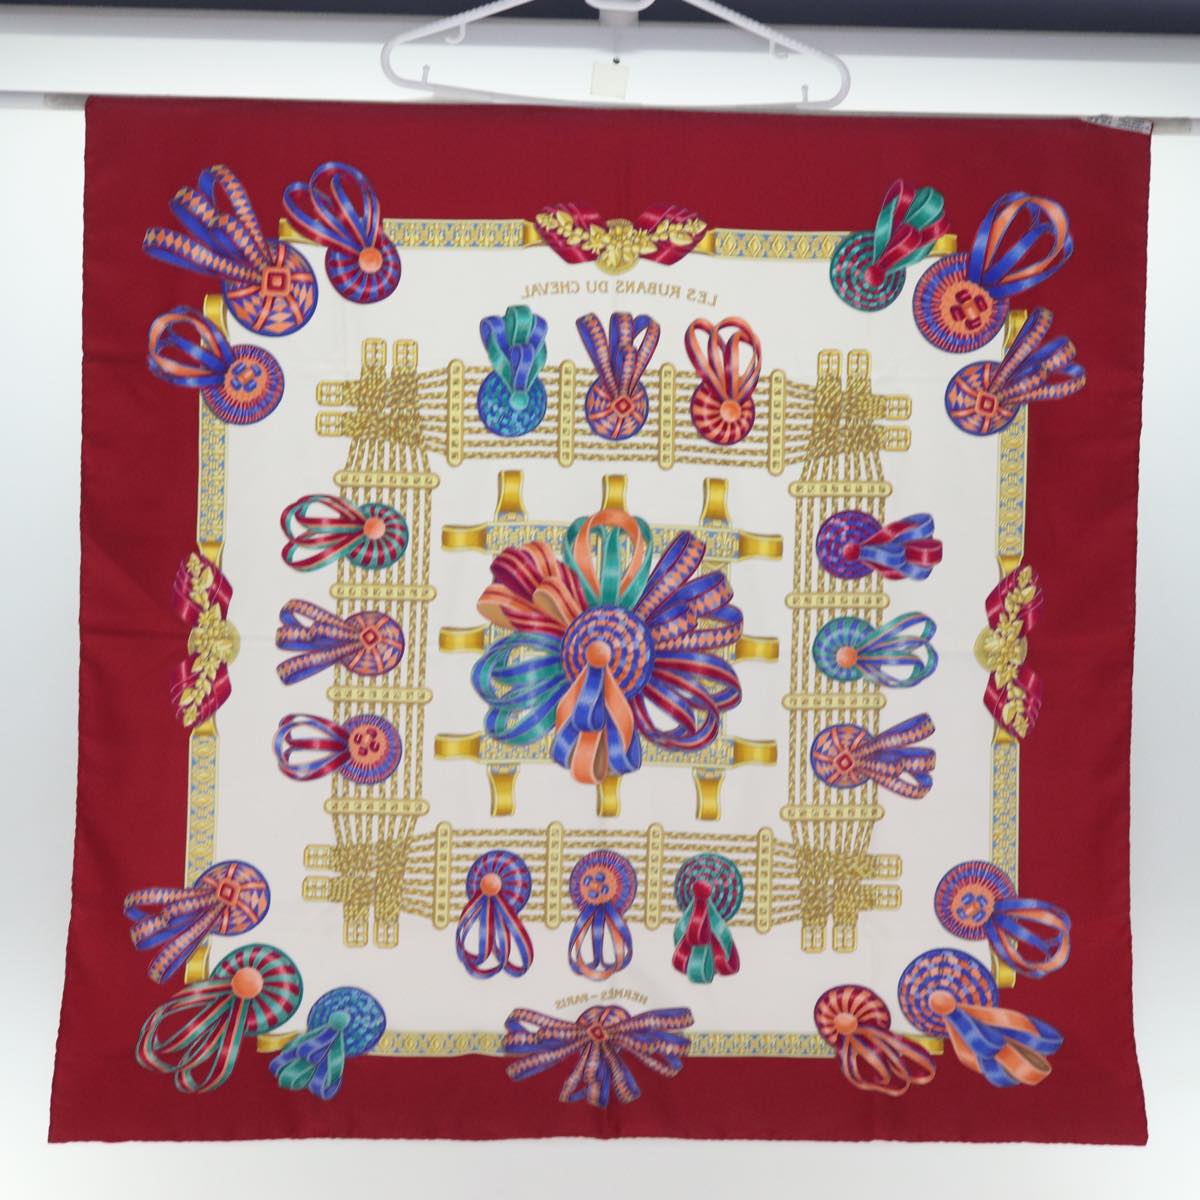 HERMES Carre 90 Scarf ""LES RUBANS DU CHEVAL"" Silk Red Auth am6113